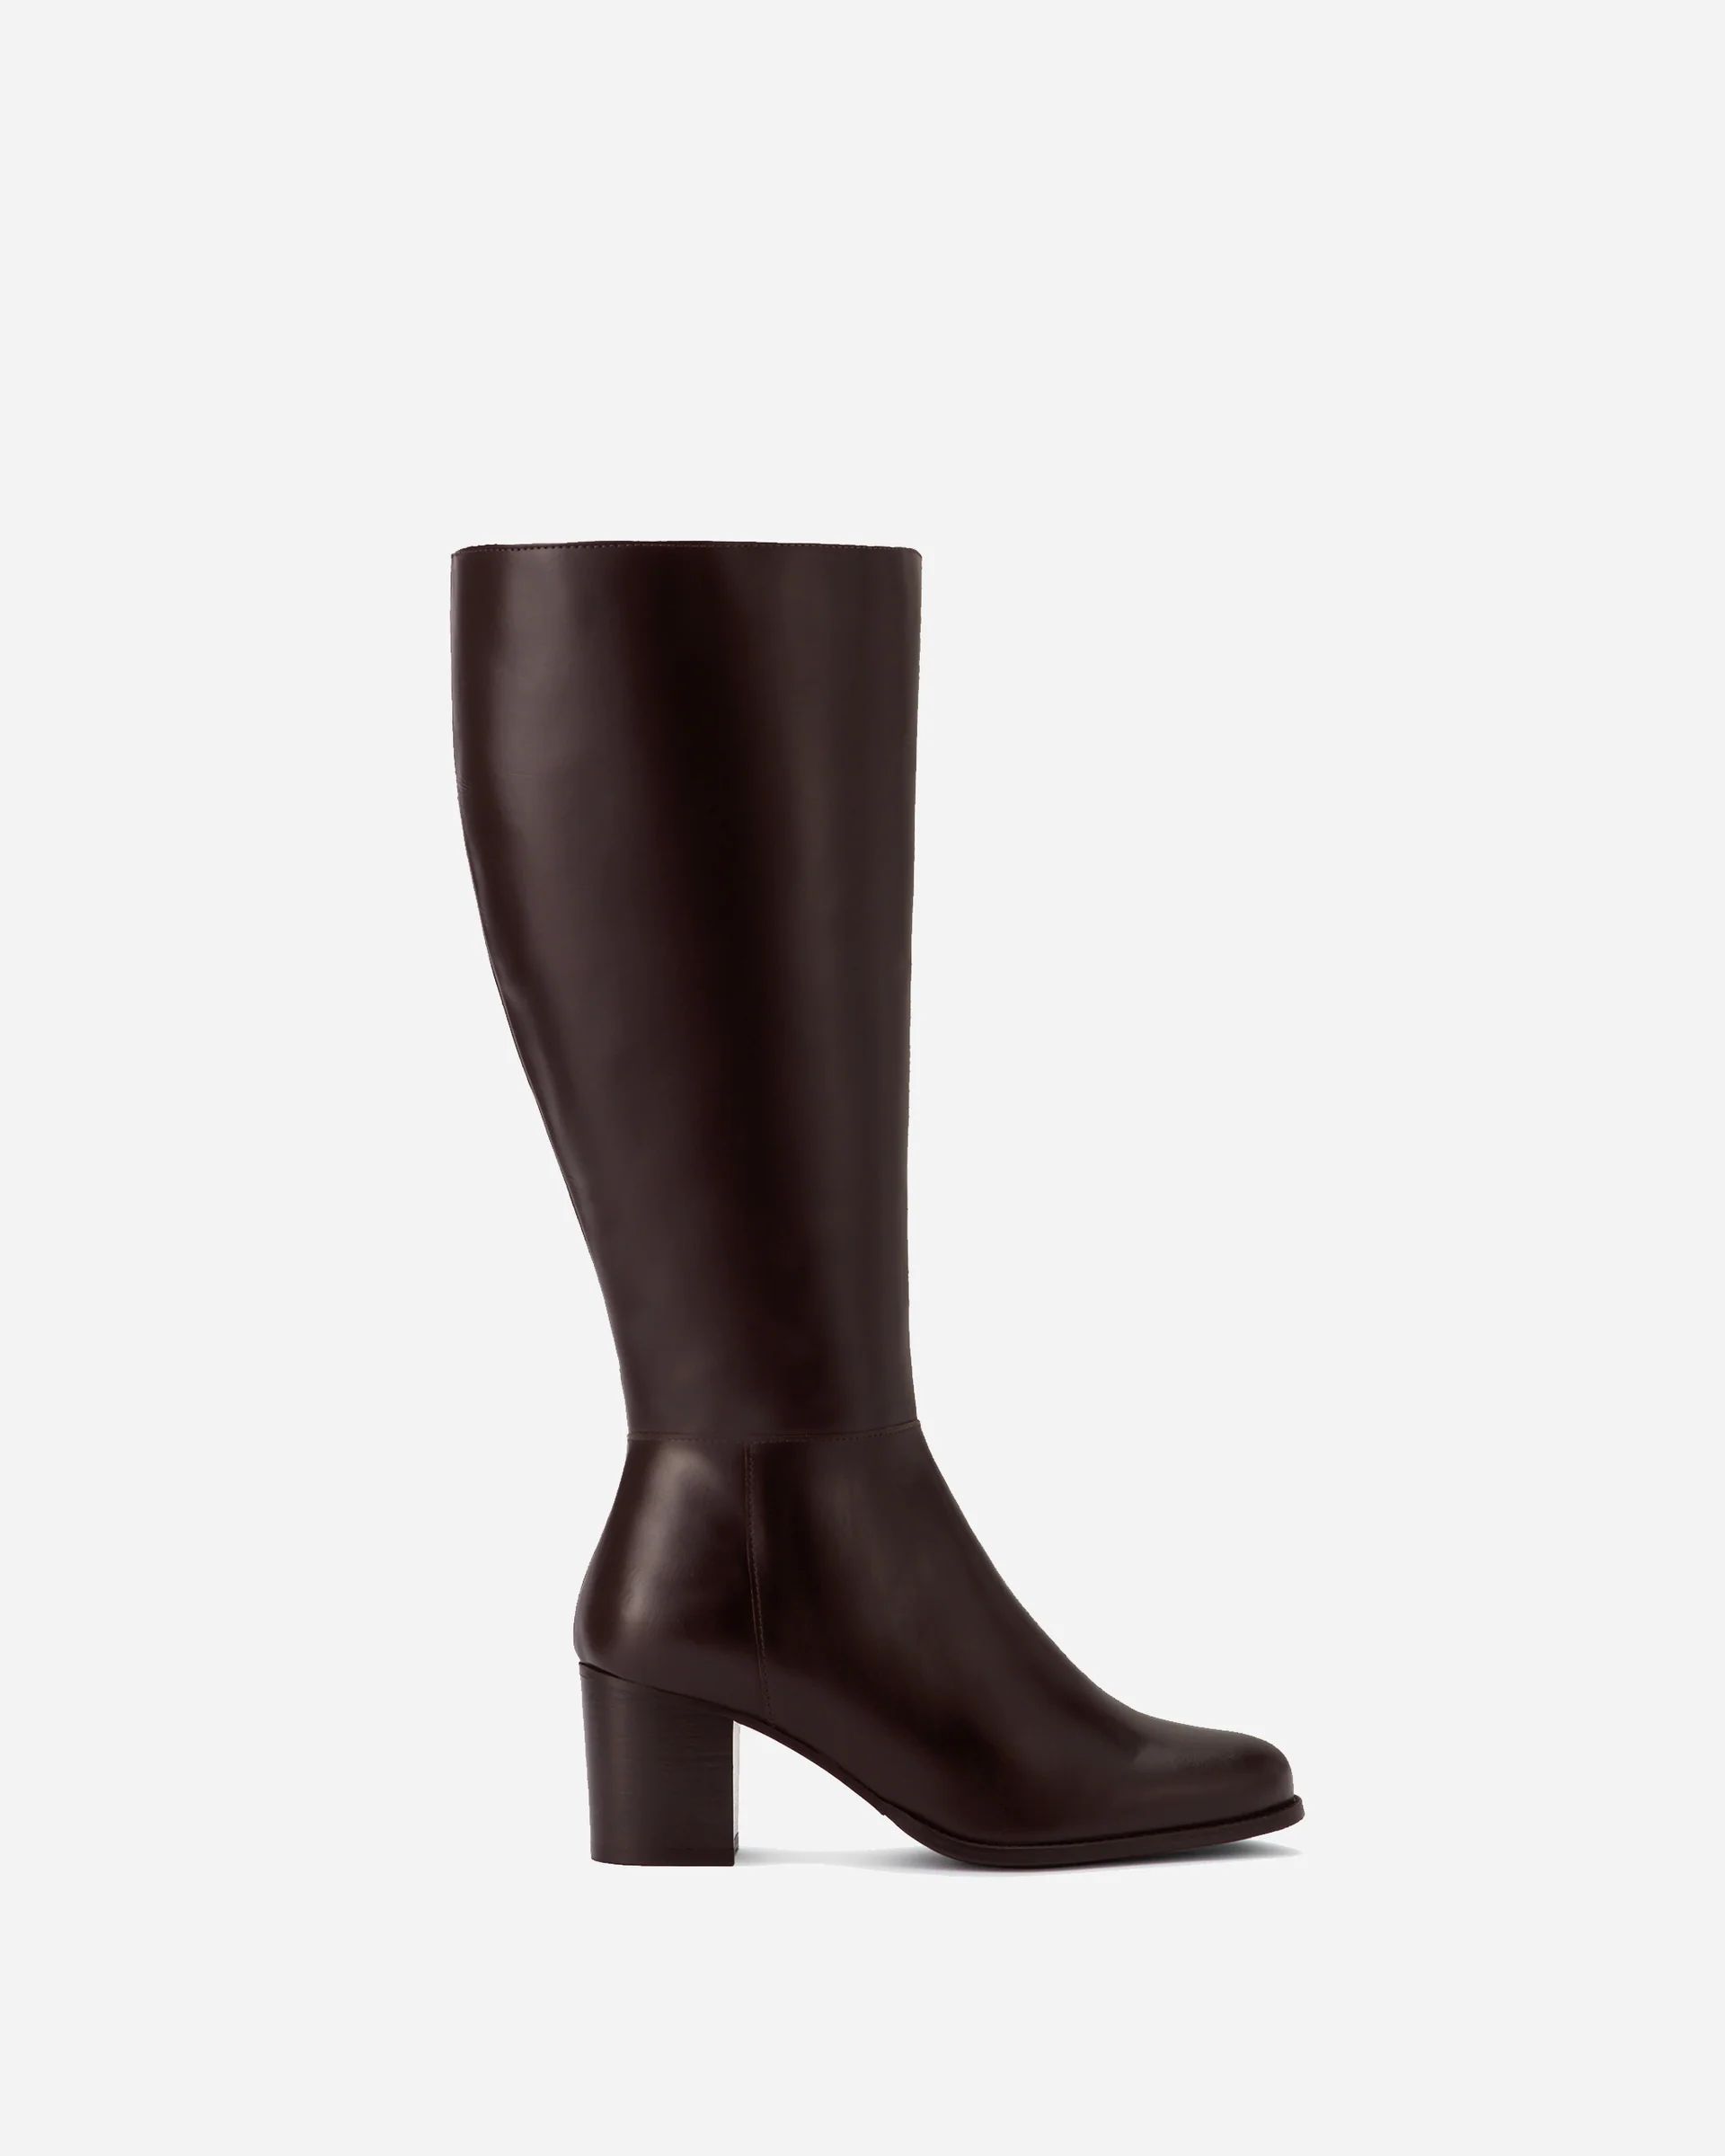 Dalia Petite Knee High Boots in Brown Leather | DuoBoots